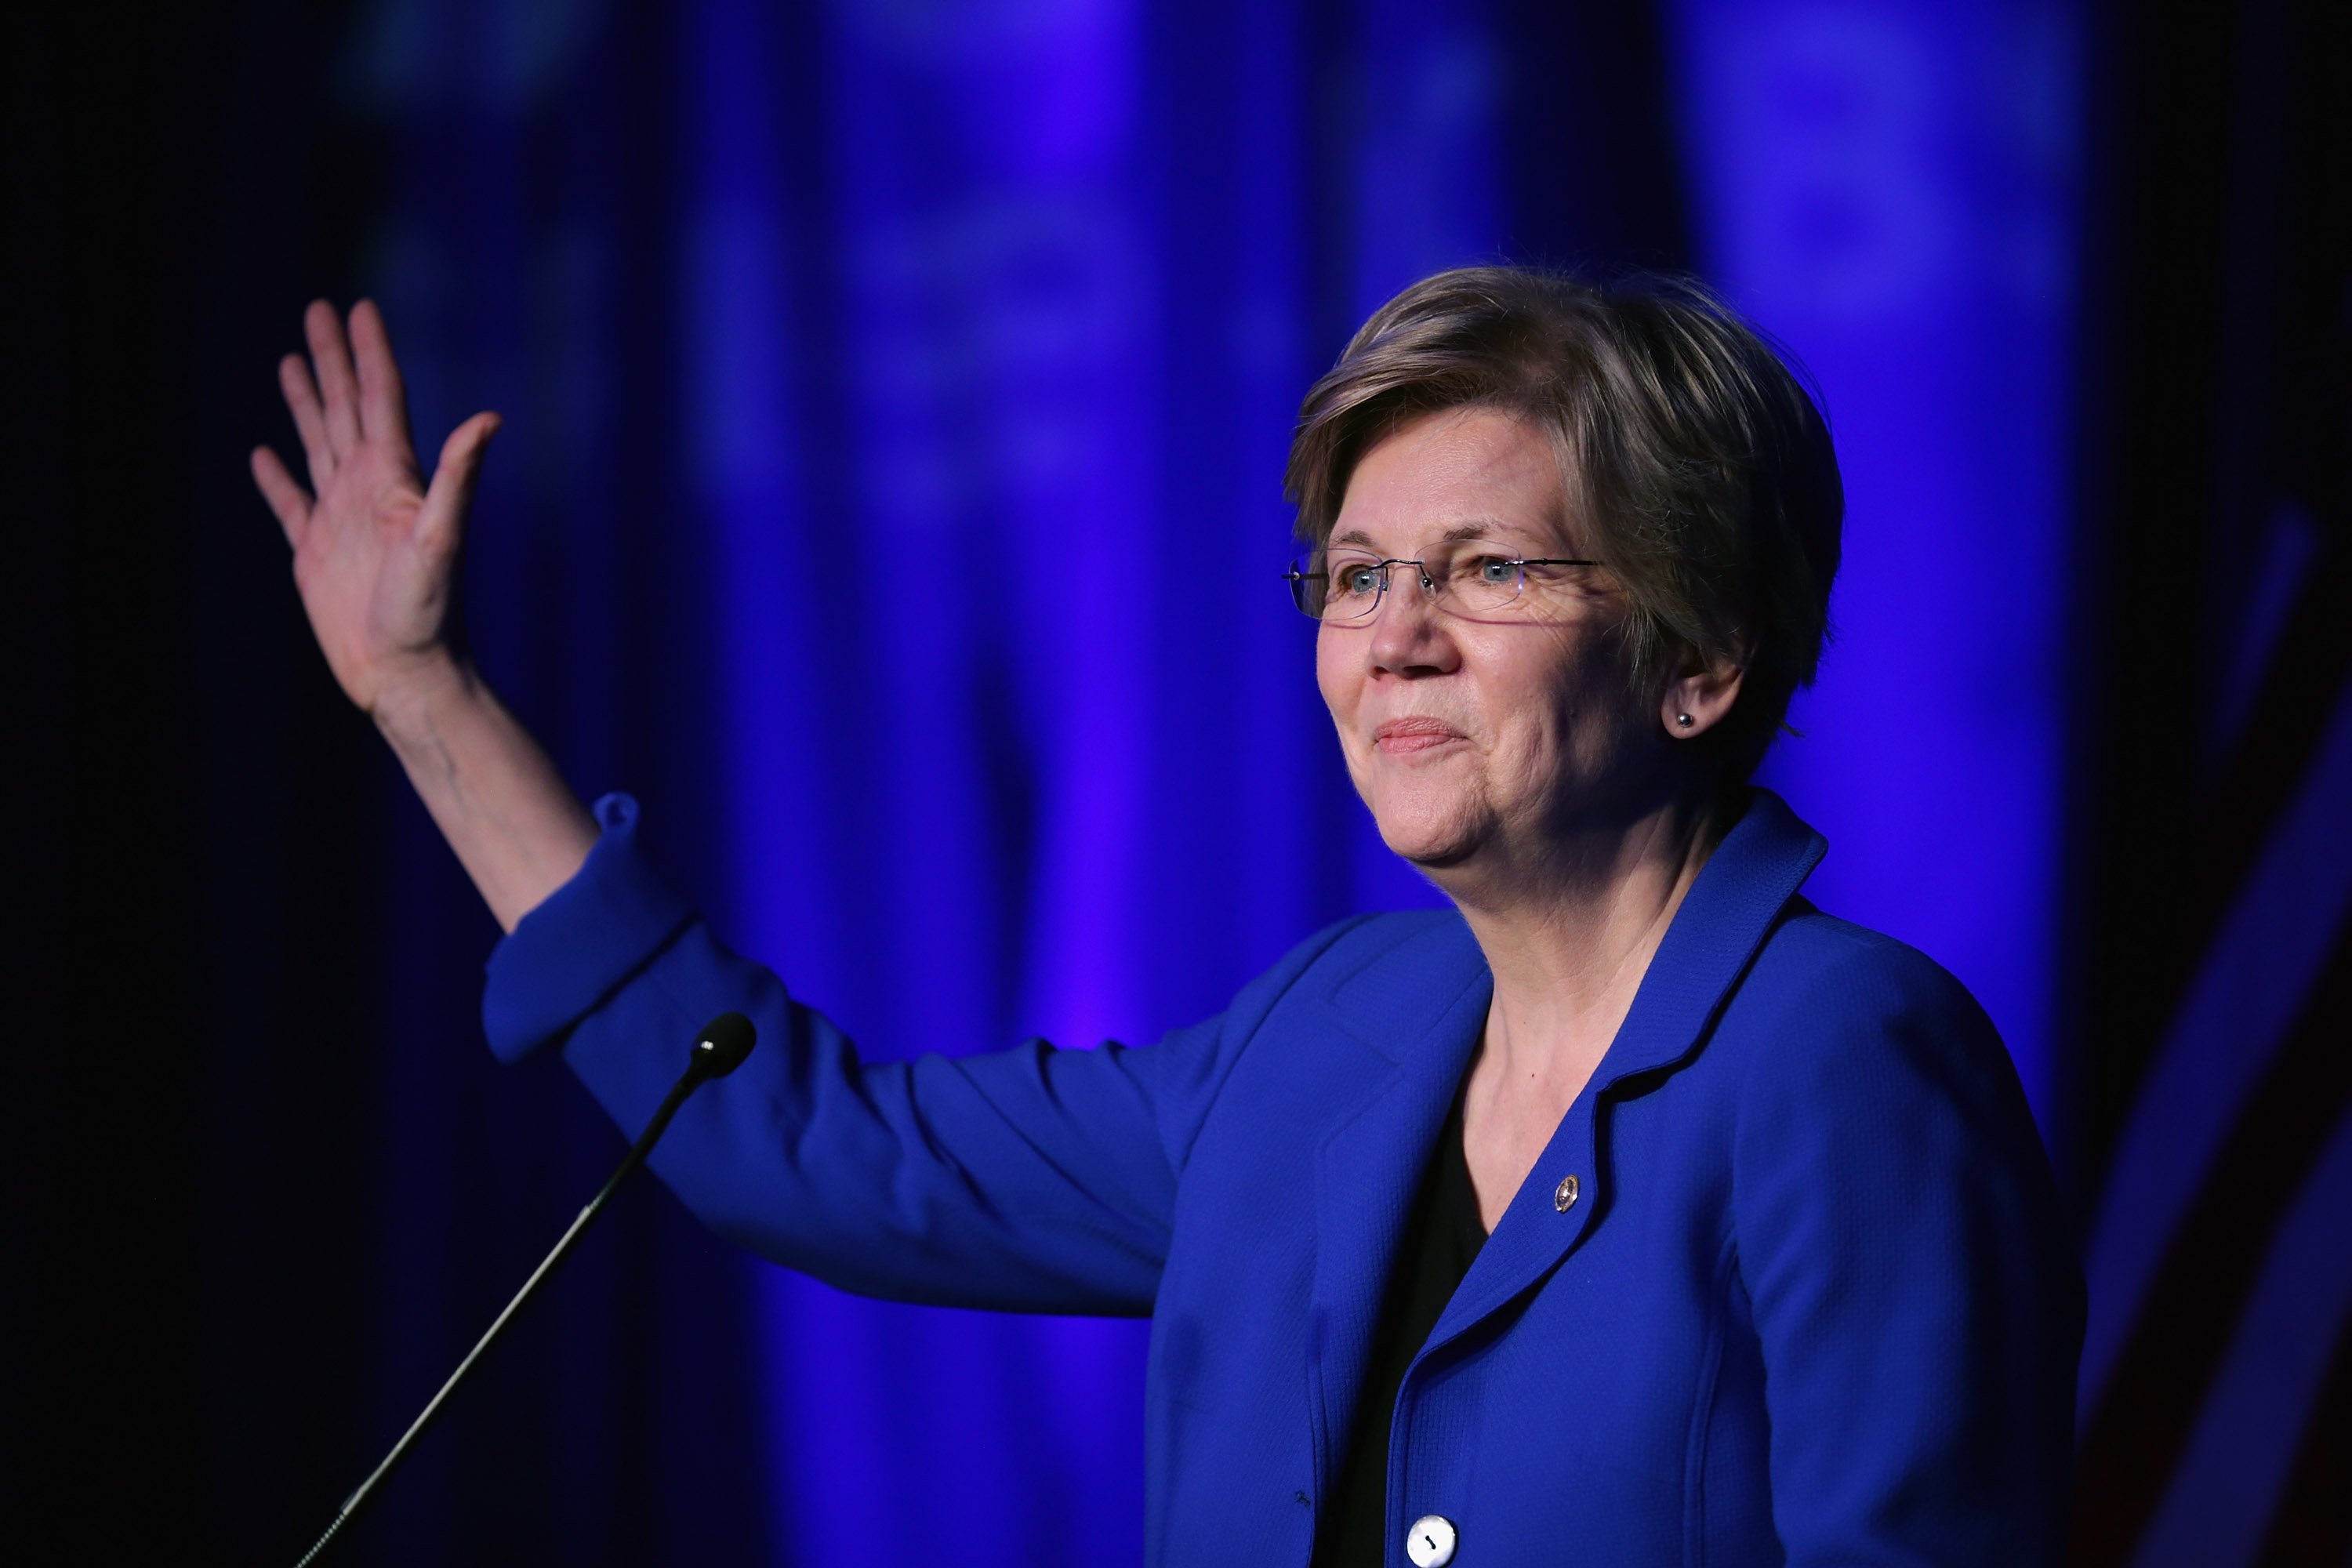 Sen. Elizabeth Warren (D-MA) delivers remarks during the Good Jobs Green Jobs National Conference at the Washington Hilton on April 13, 2015 in Washington.